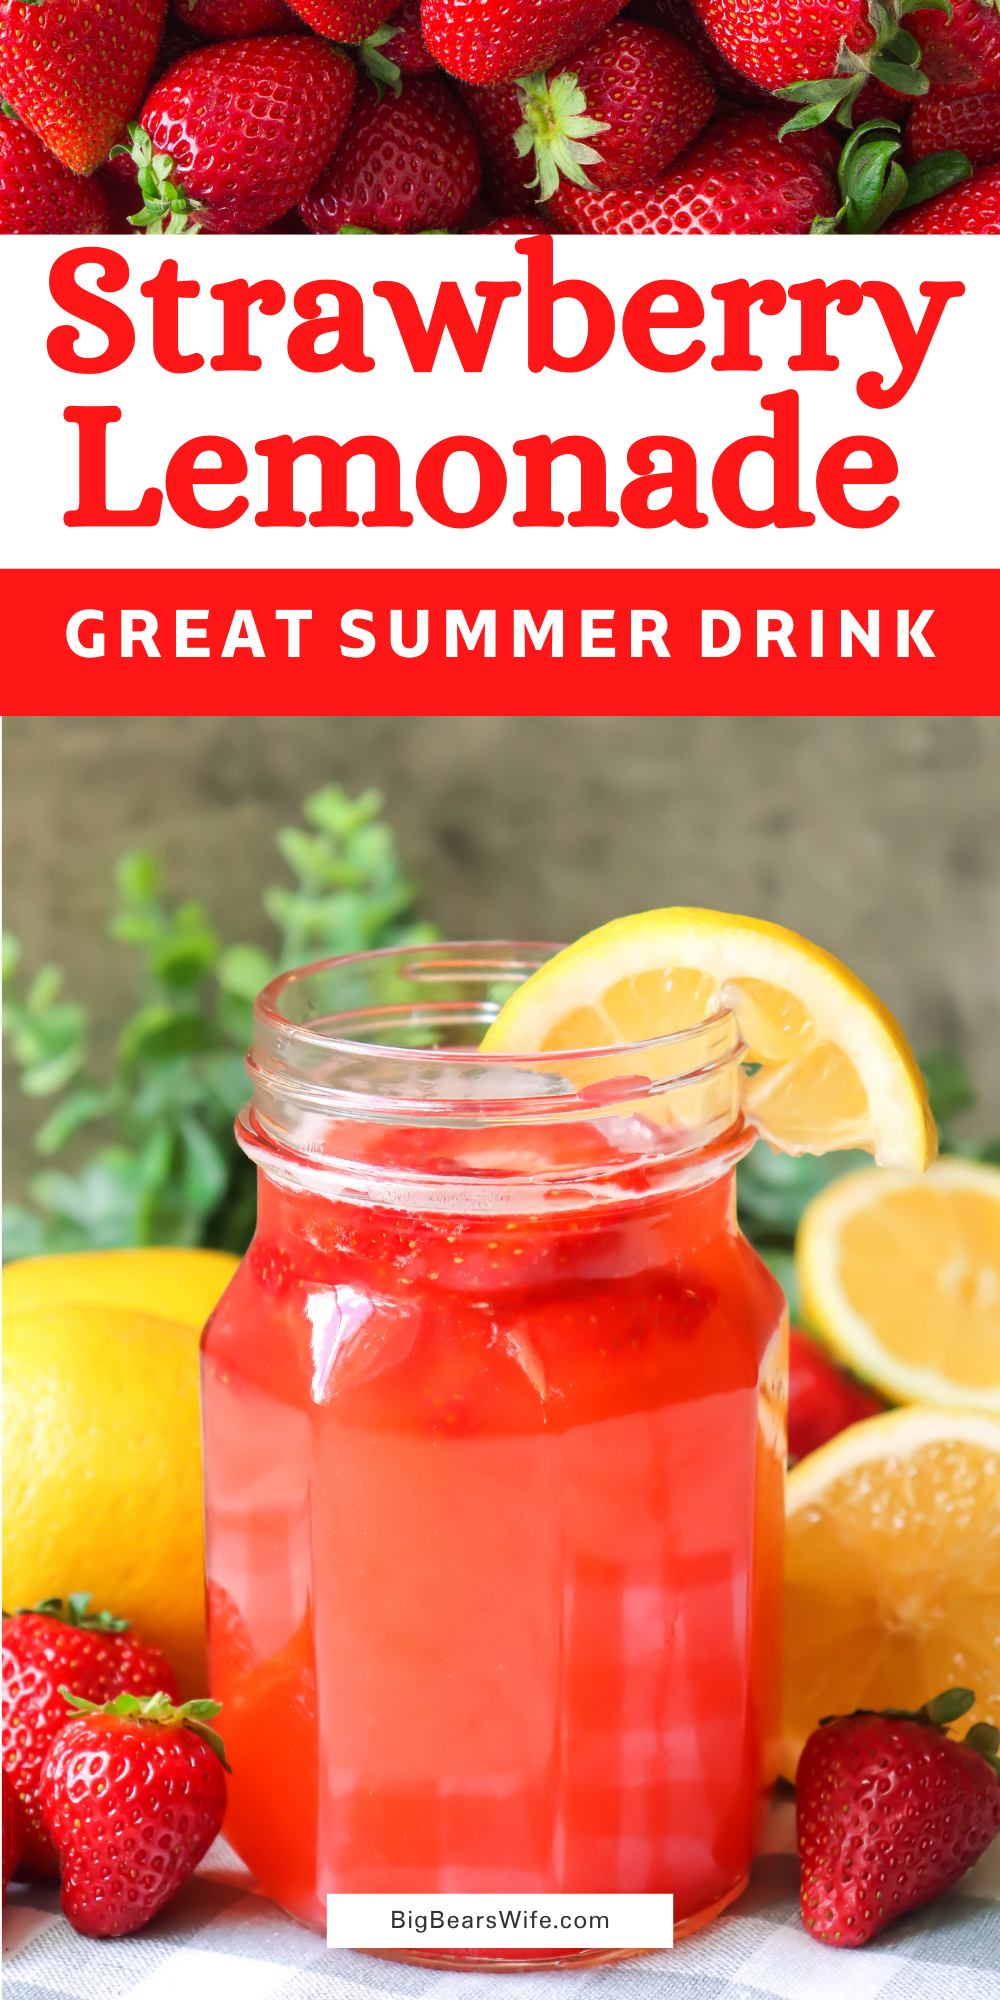 Ready for the perfect summer drink? This Strawberry Lemonade is refreshing and easy to make!  via @bigbearswife